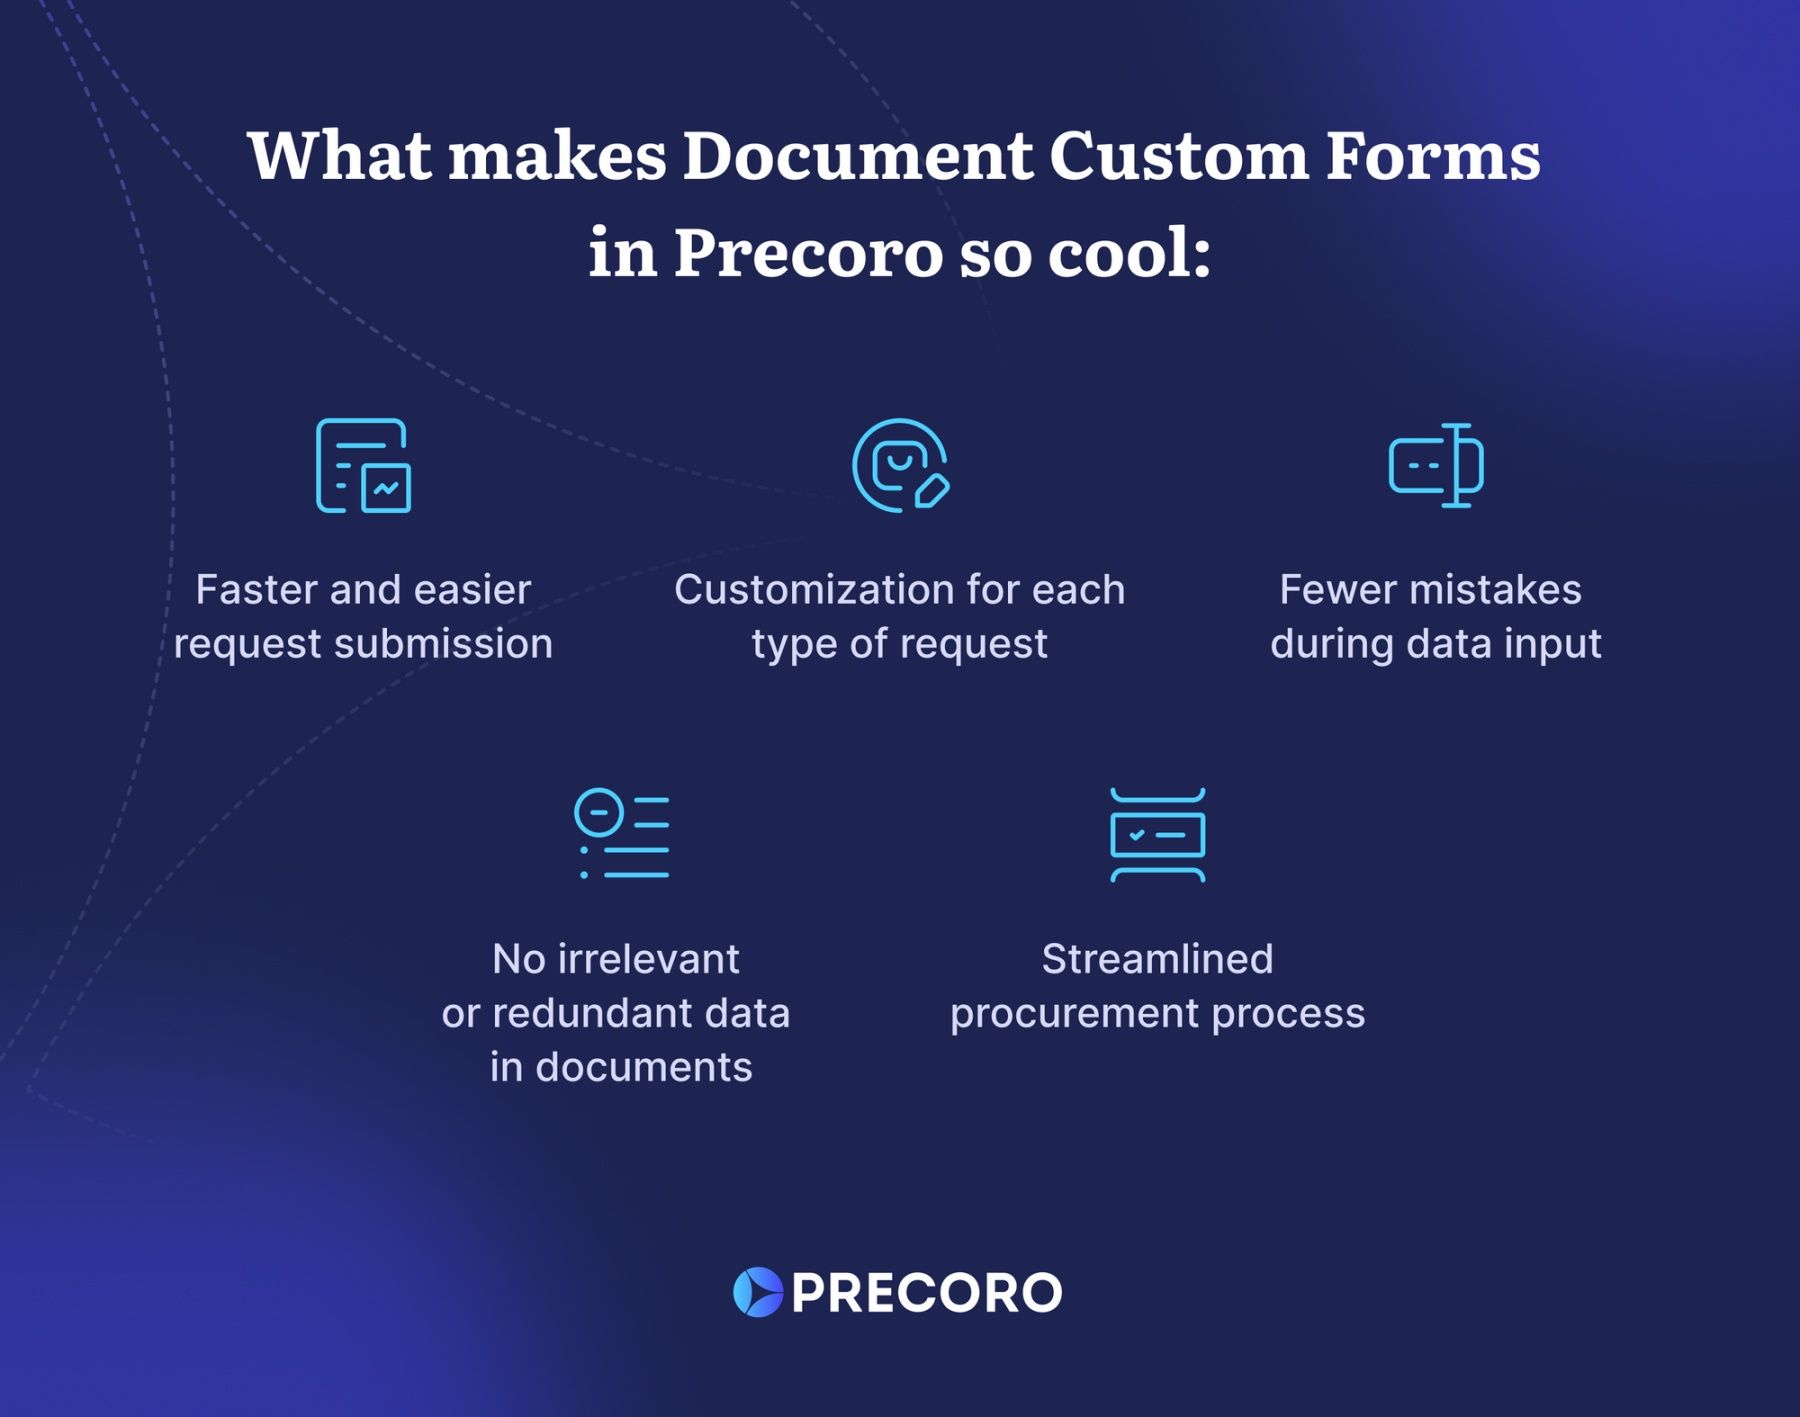 benefits of the document custom forms in precoro